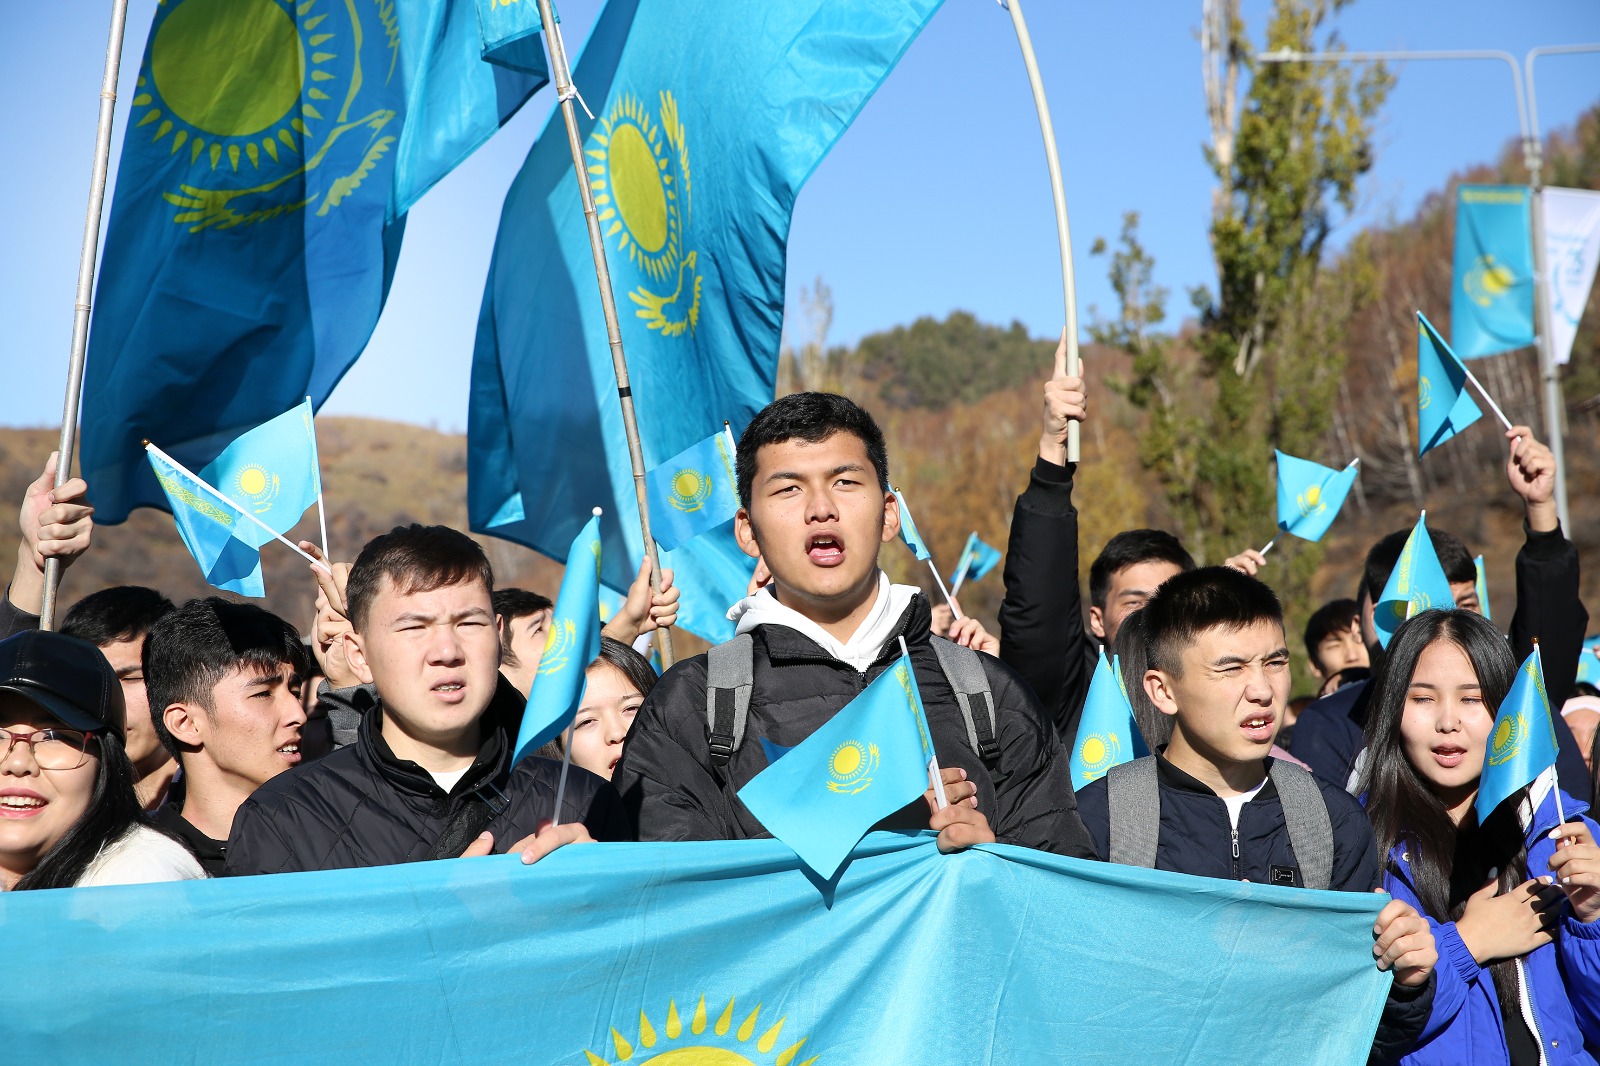 Kazakhstan's young population has shifted the country's dynamics